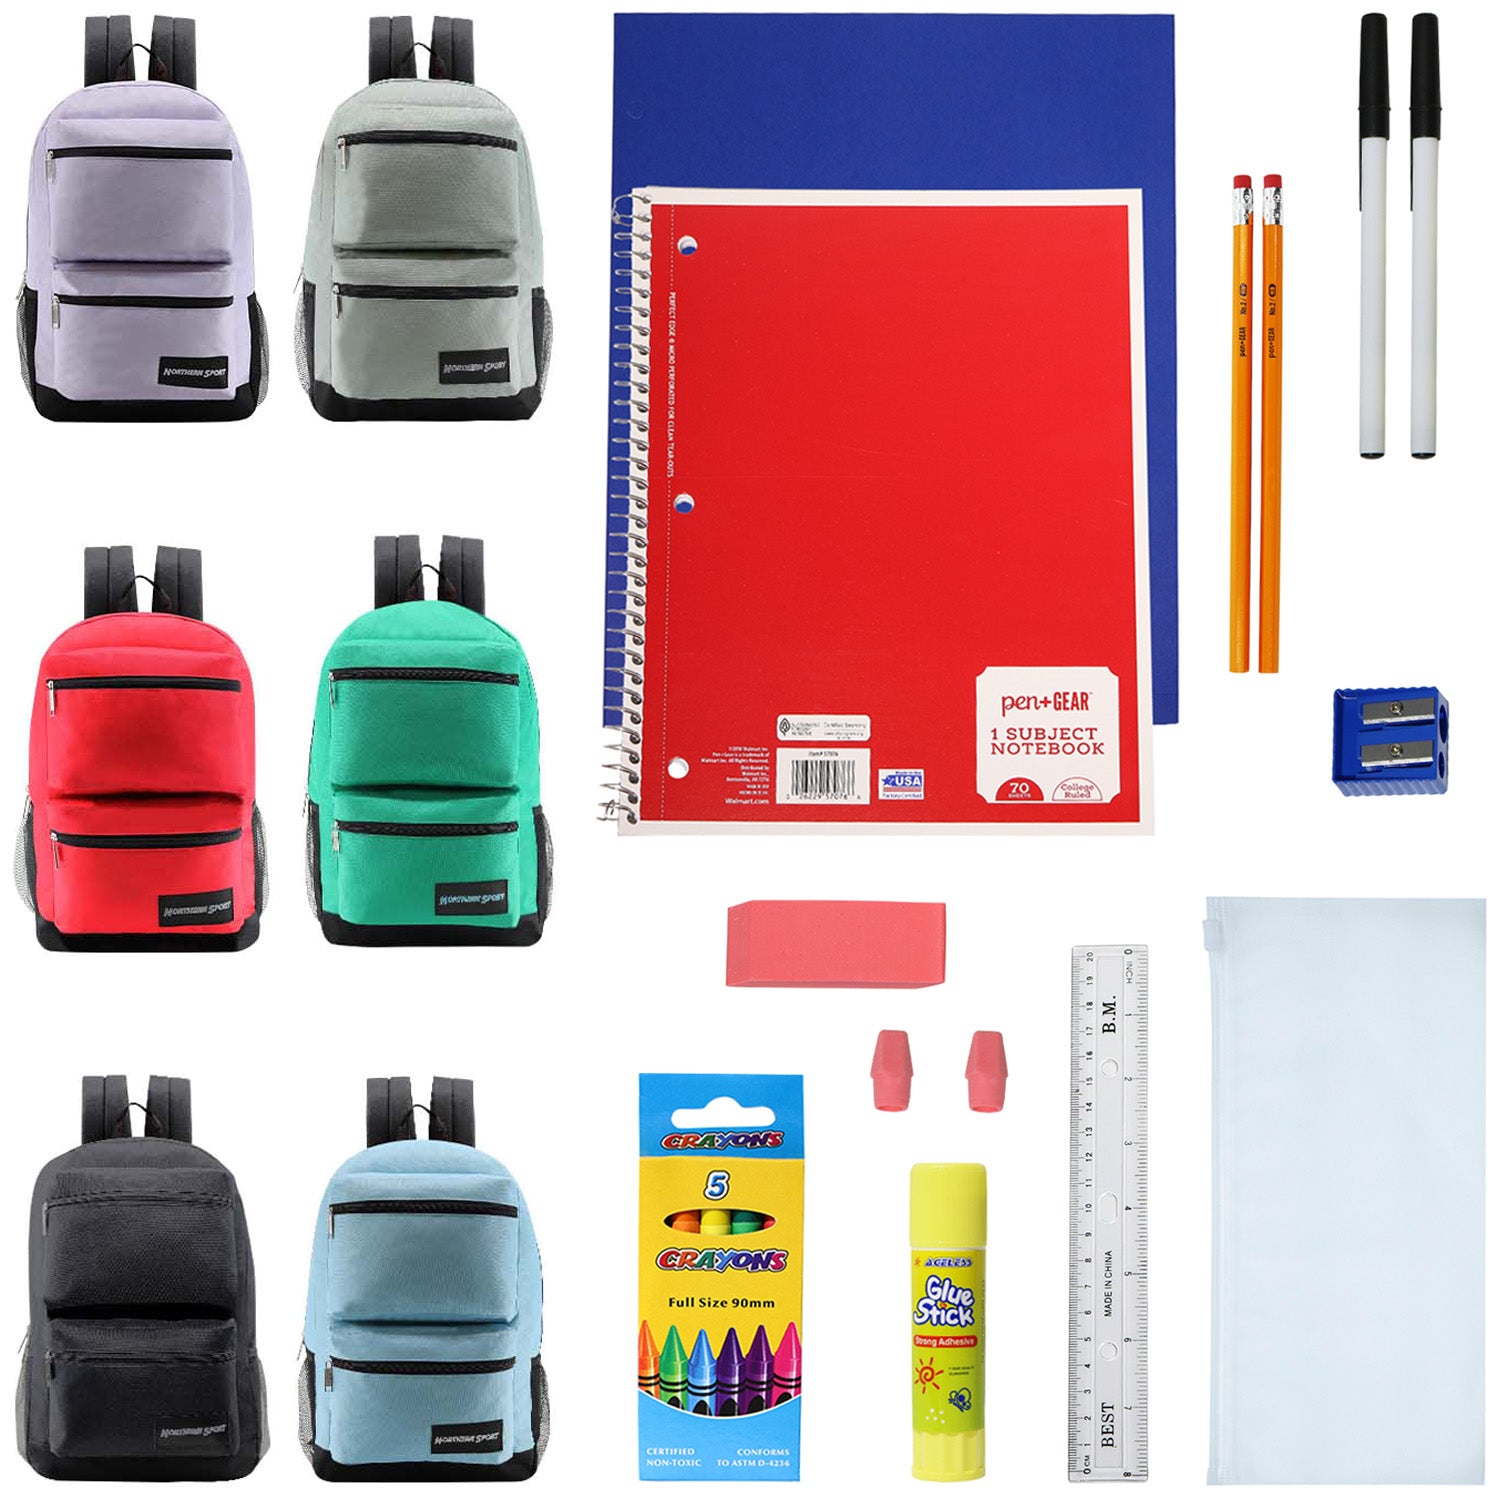 Back to School Supplies Kit for College Students: The Complete